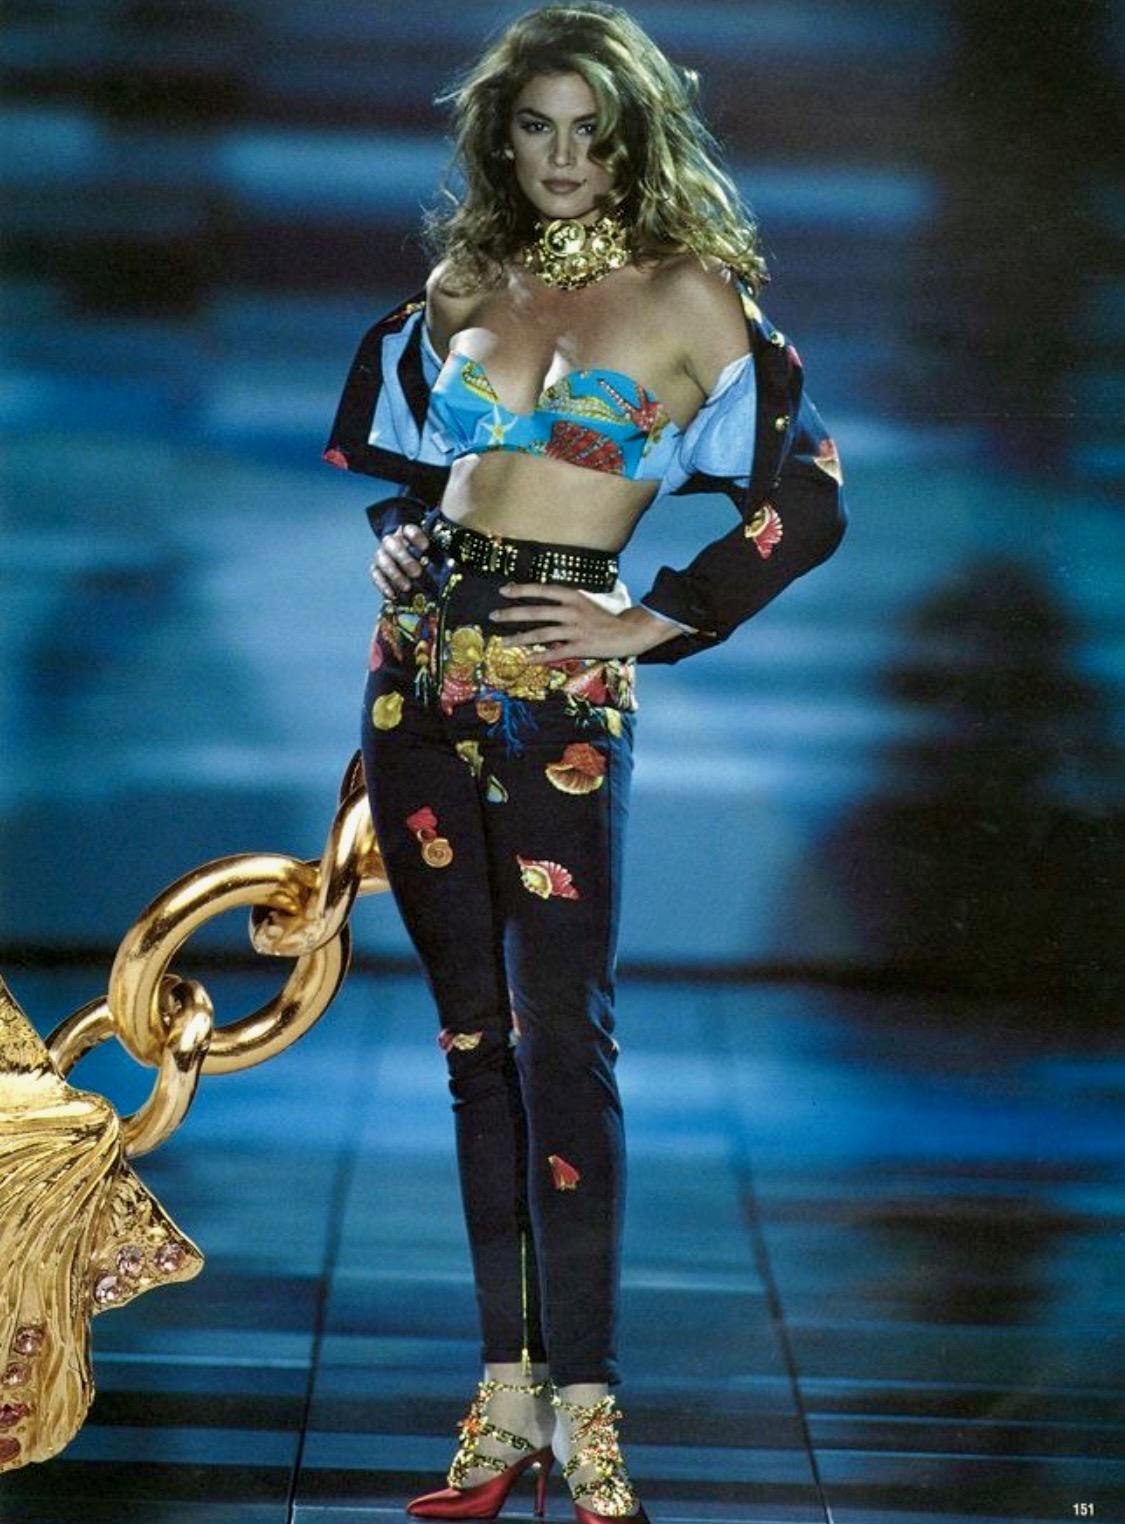 Presenting a flirty cropped denim jacket designed by Gianni Versace for his Spring/Summer 1992 collection. Debuting on look 42 on Cindy Crawford, this jacket features large golden Medusa button closures and two front pockets. Gianni elevated the